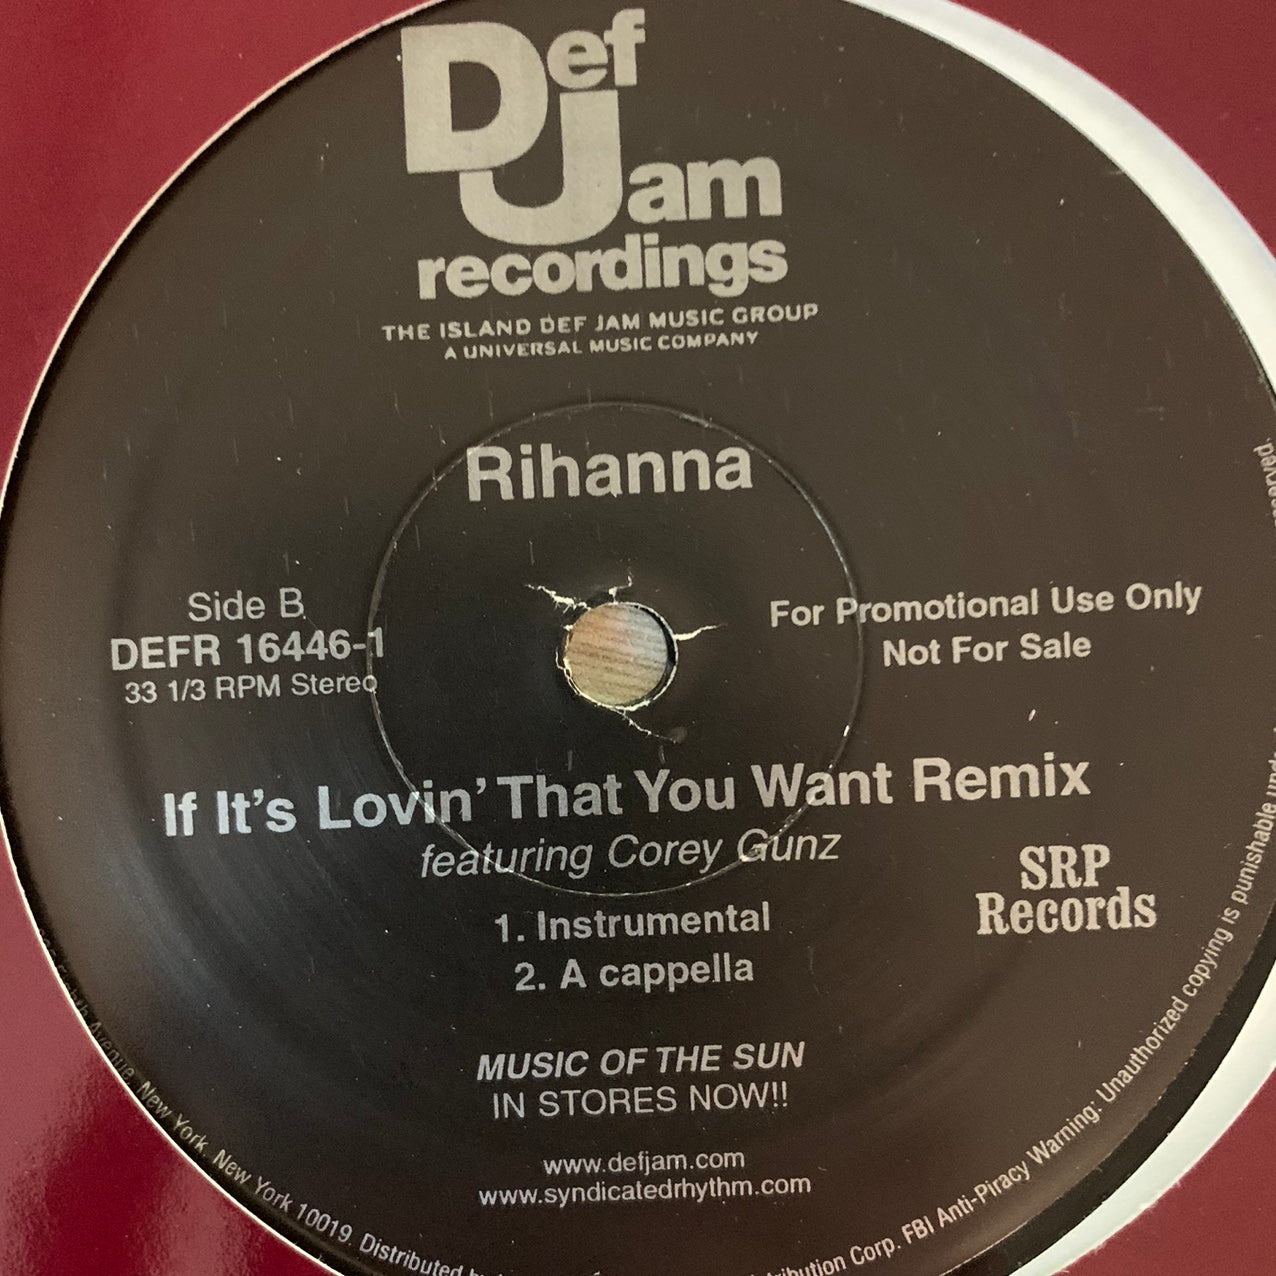 Rihanna “If It’s Love That You Want” 4 version 12inch Vinyl